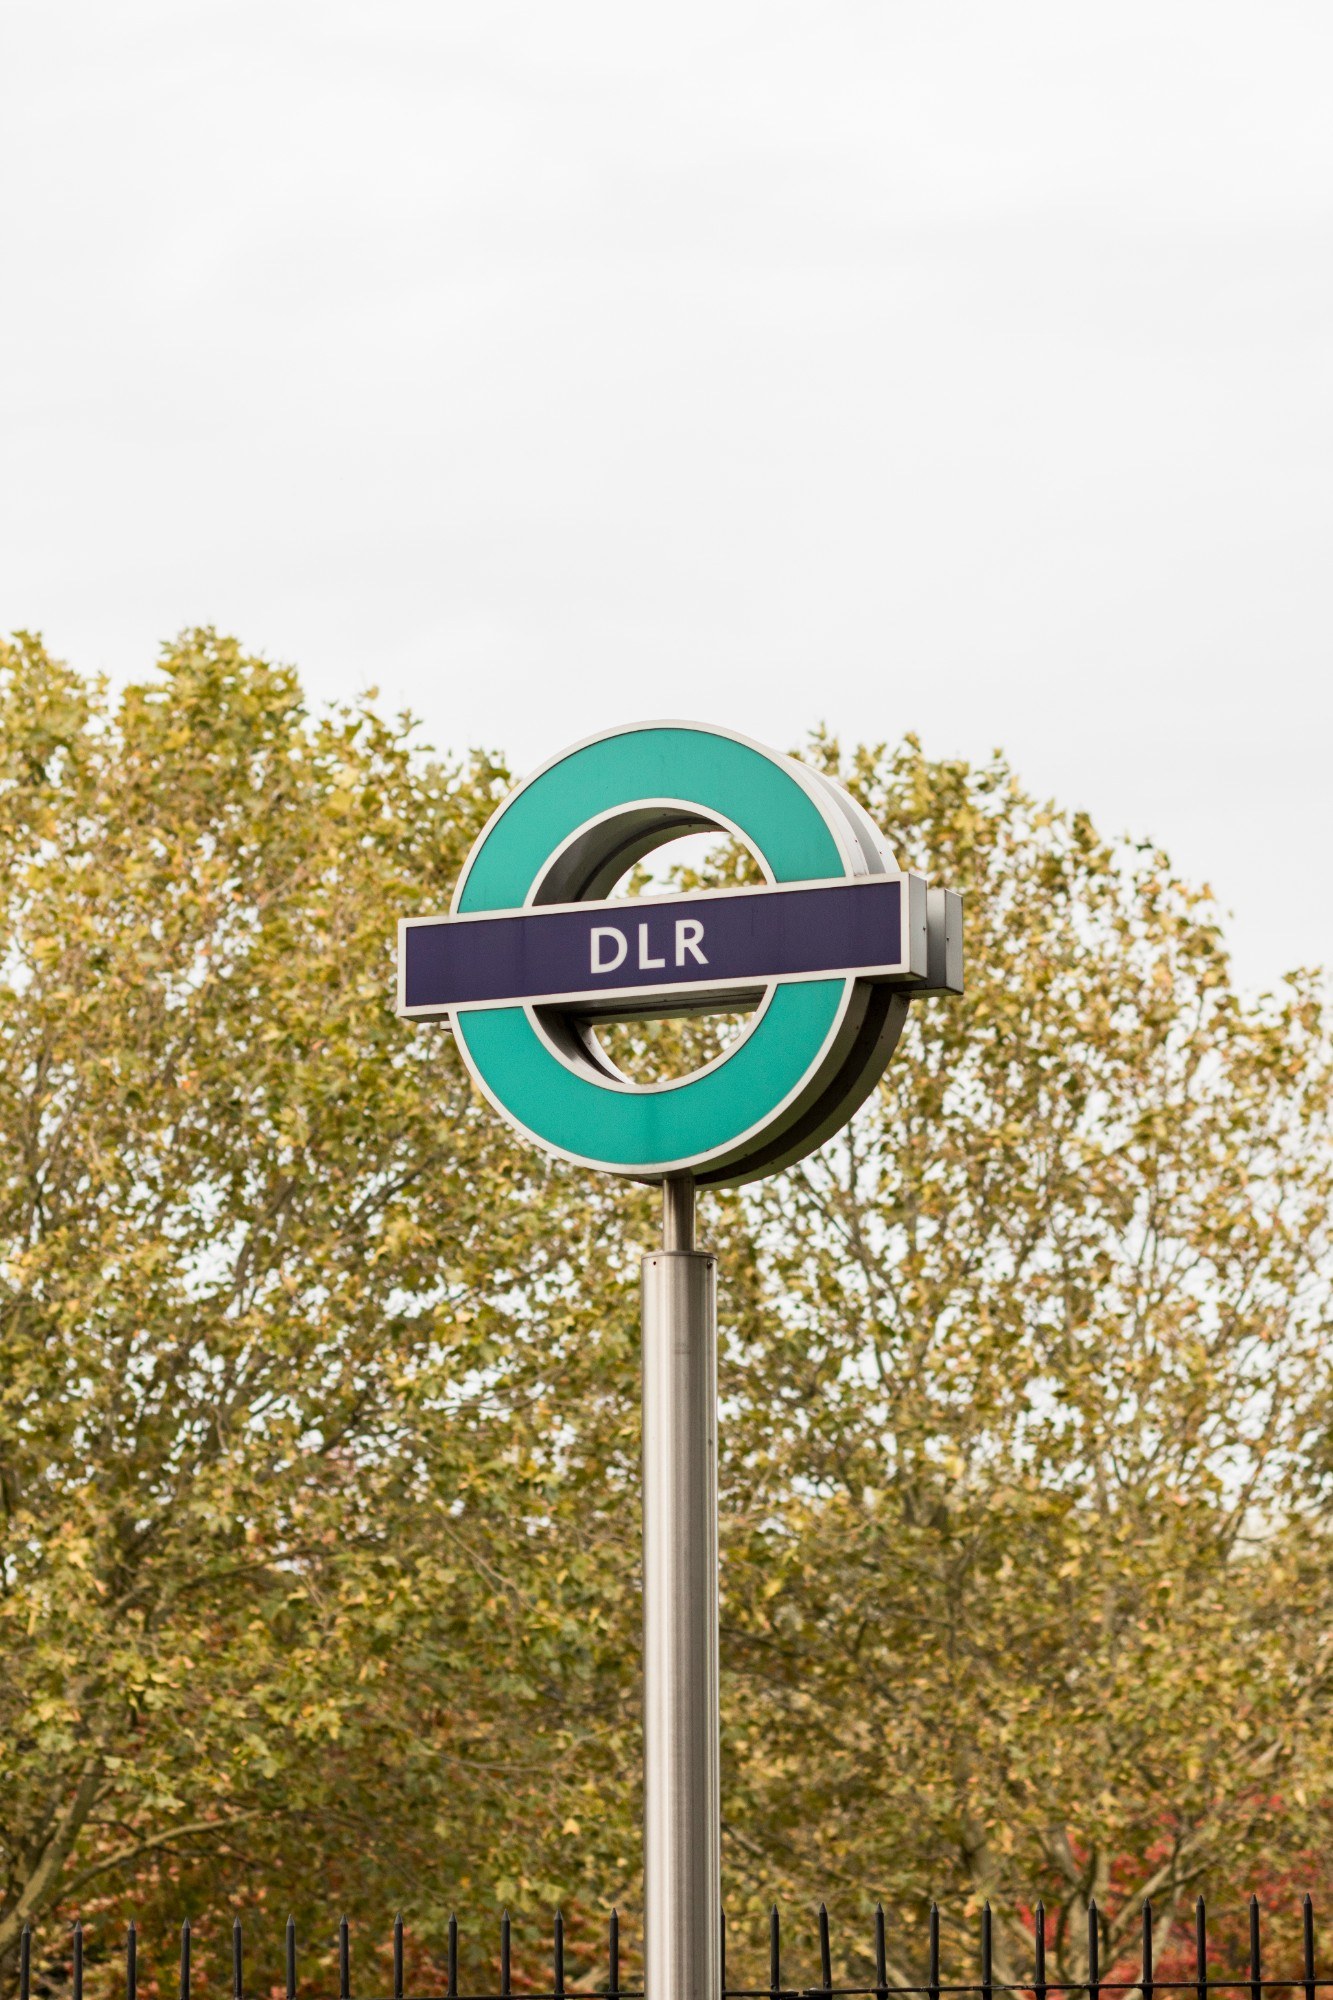 DLR sign in the Royal Docks